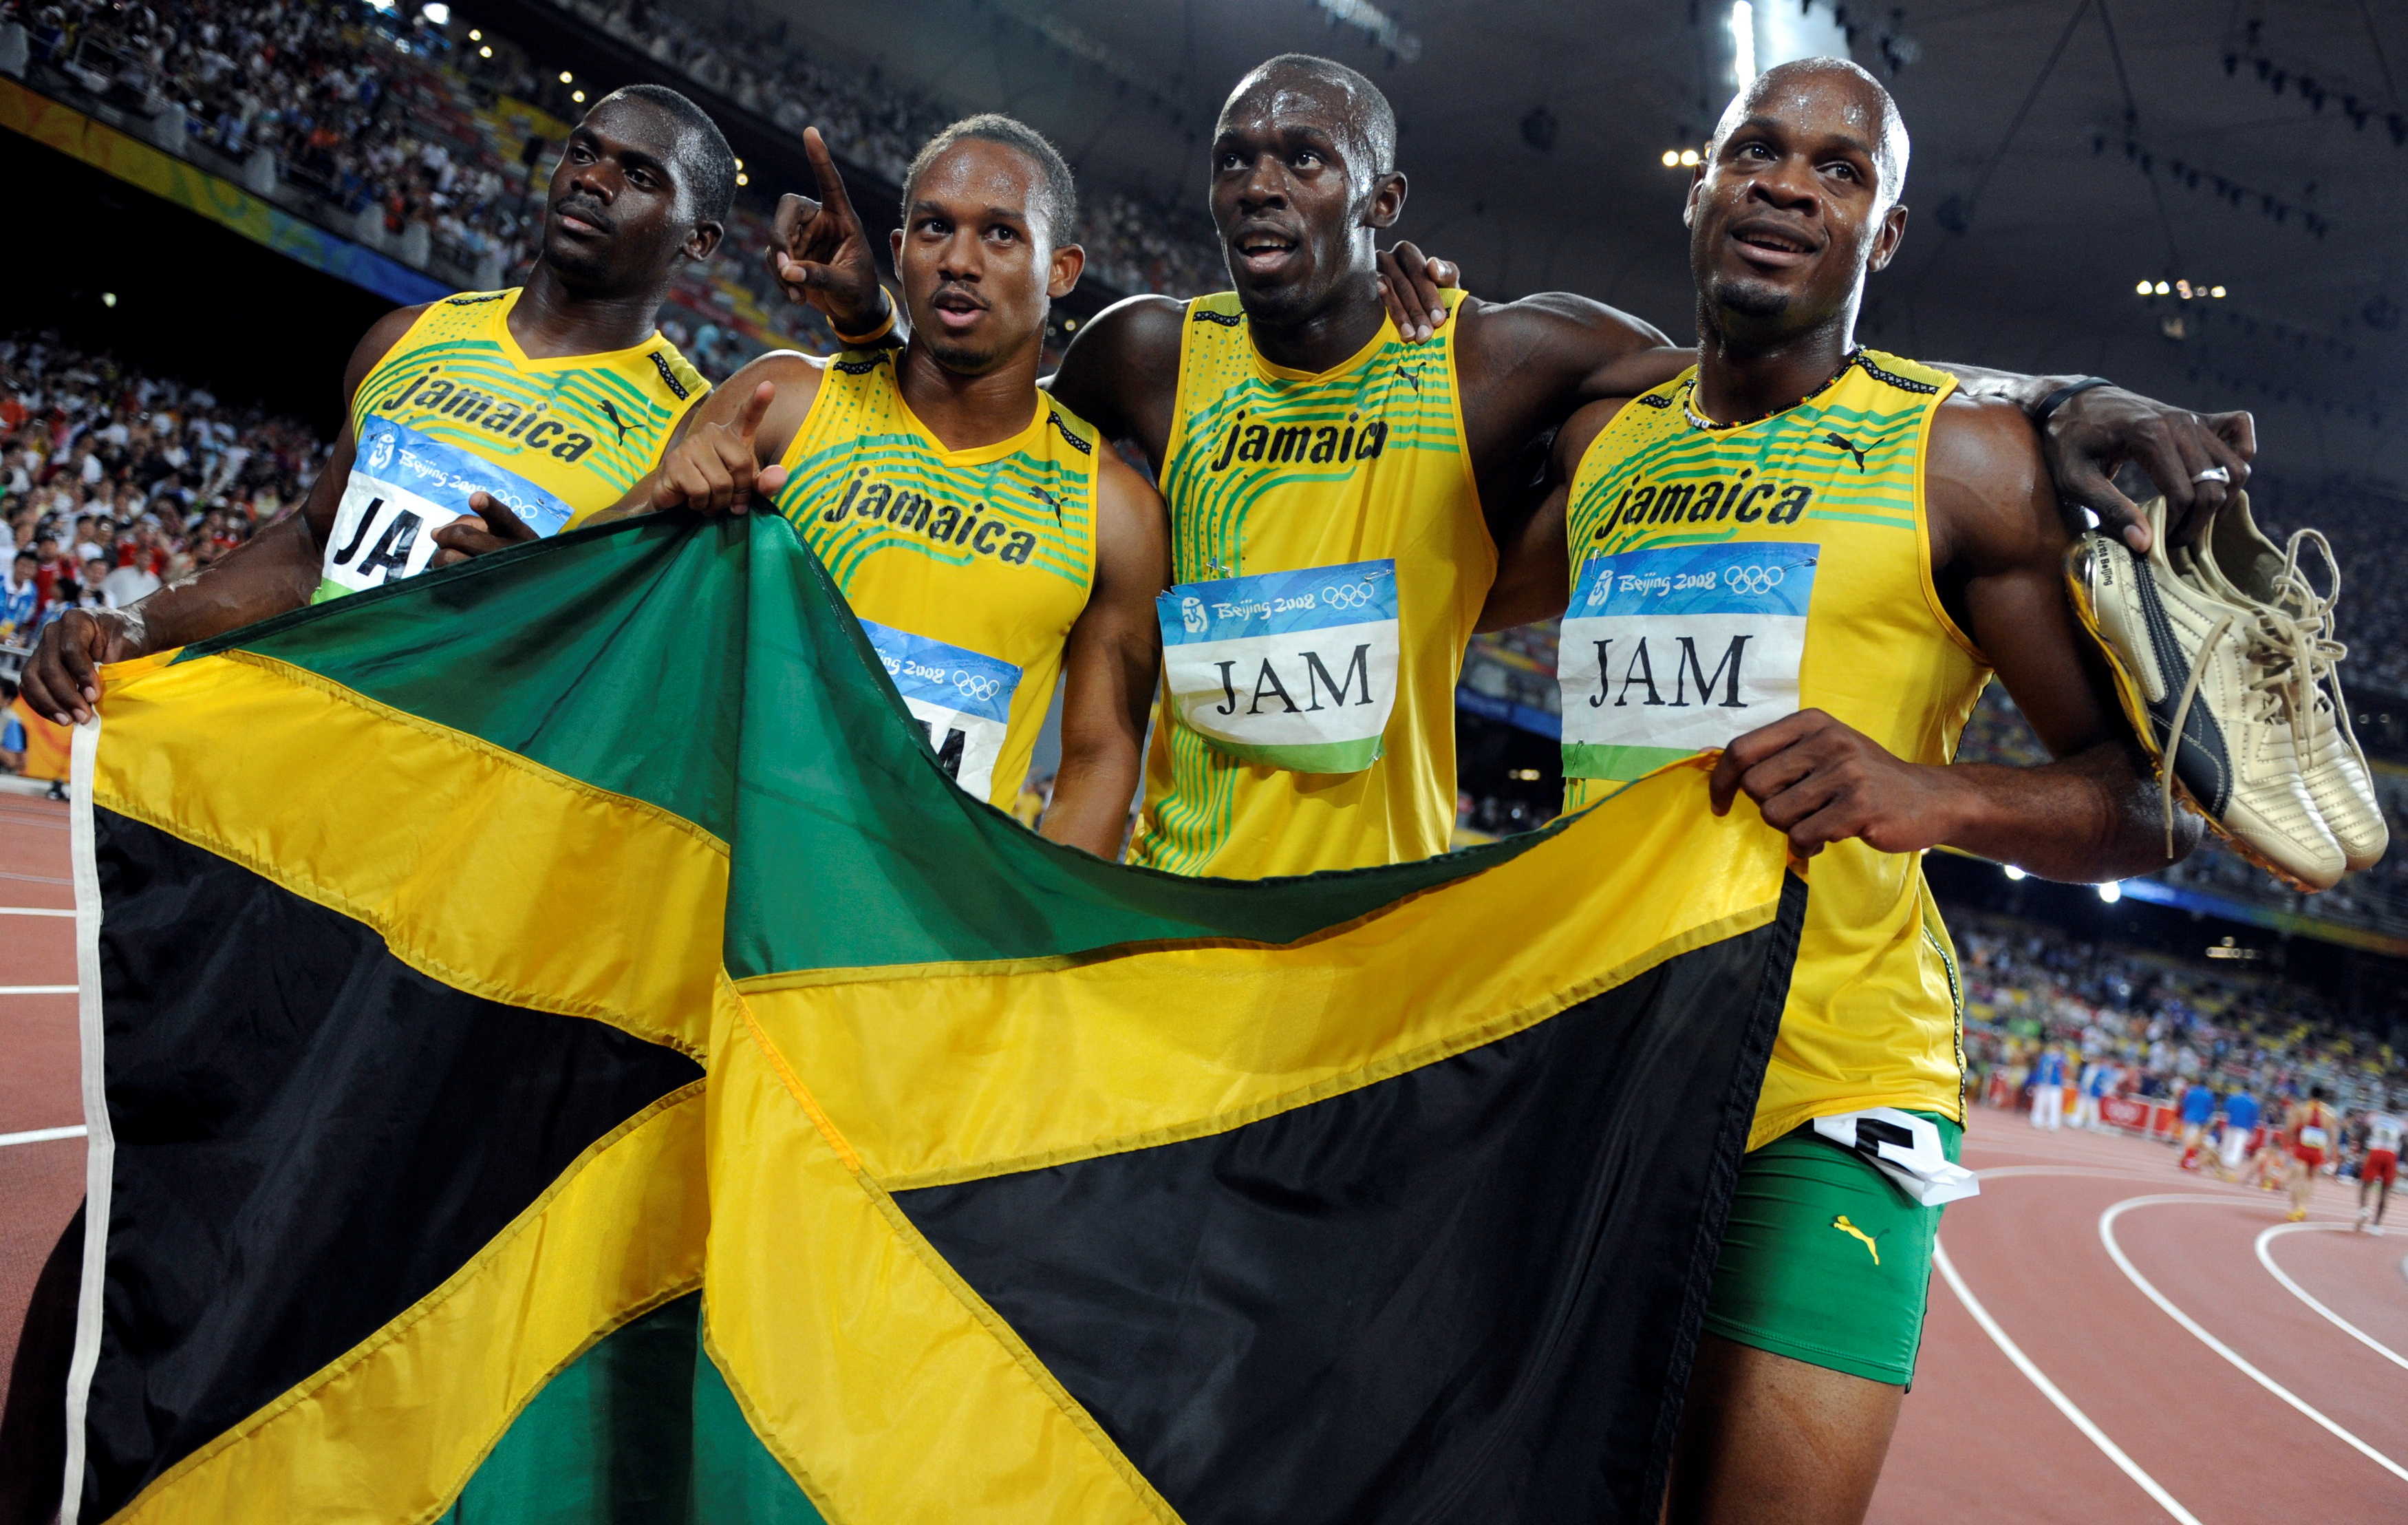 FILE PHOTO: Men's 4x100m relay Asafa Powell, Usain Bolt, Michael Frater, Nesta Carter of Jamaica celebrate after winning the final of the athletics competition in the National Stadium during the Beijing 2008 Olympic Games August 22, 2008.  Usain Bolt lost one of his nine Olympic gold medals after Jamaica team mate Nesta Carter was found guilty of doping at the 2008 Beijing Olympics.   REUTERS/Kai Pfaffenbach/File Photo